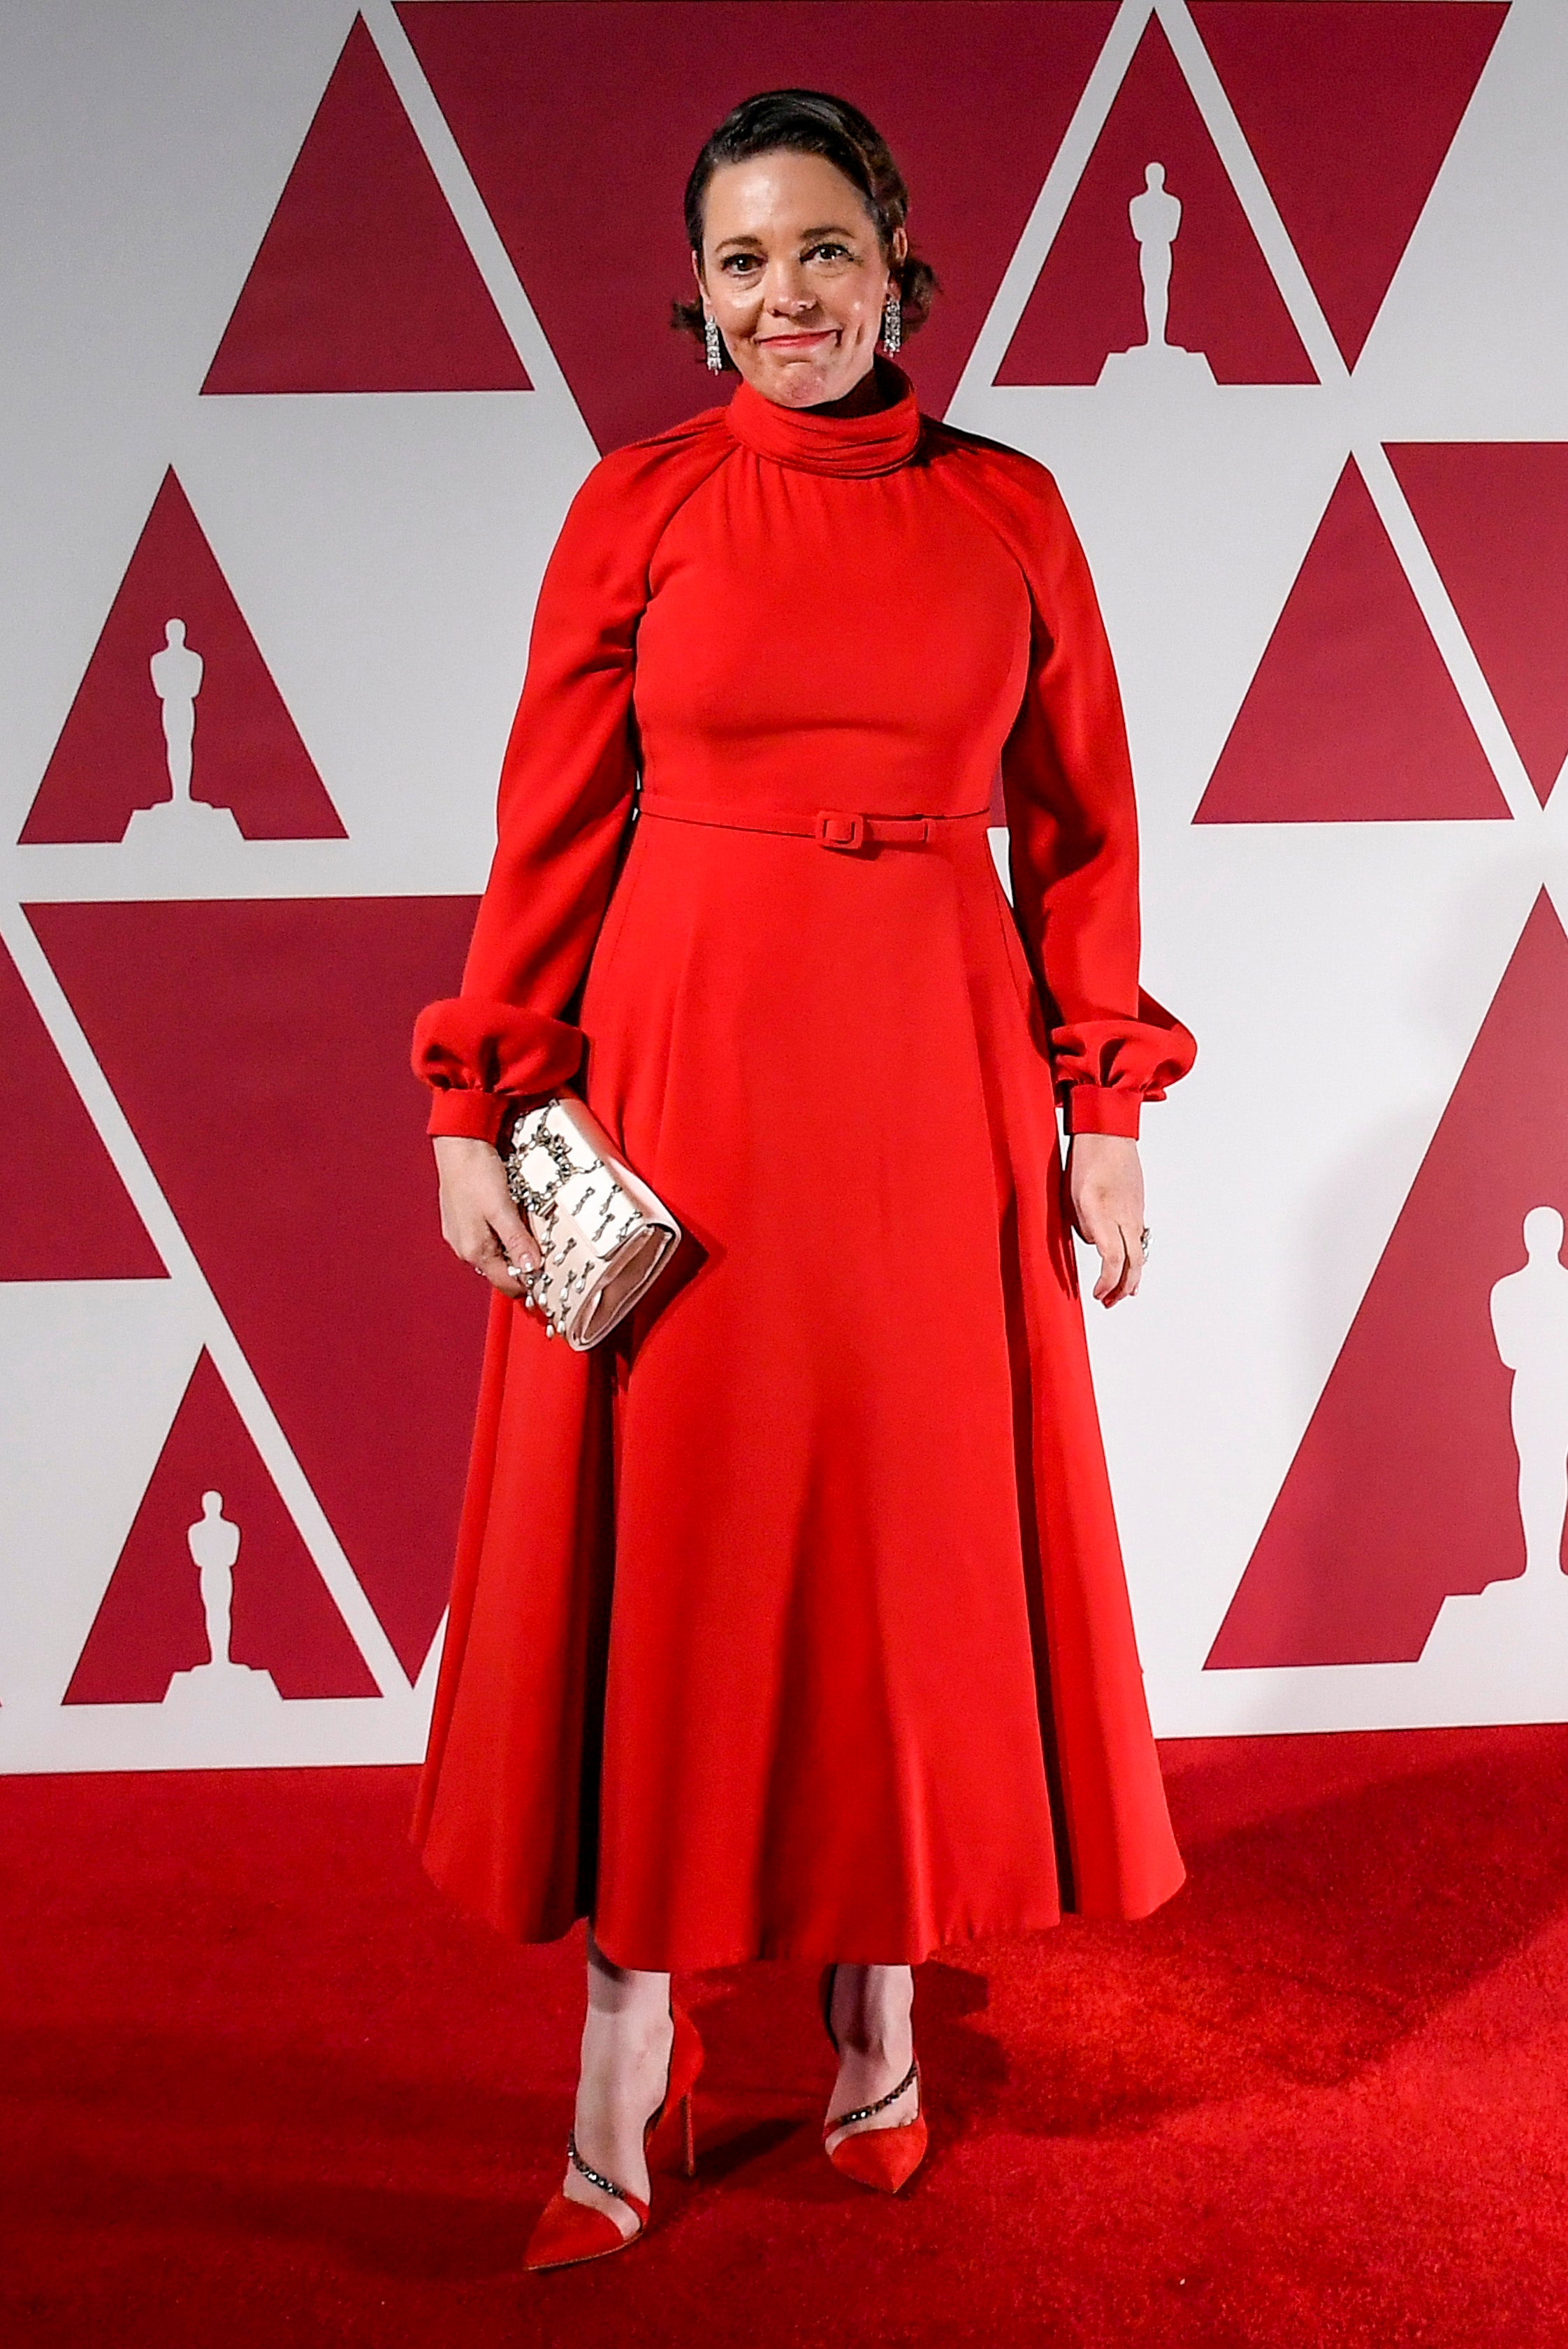 Olivia Colman at the 2021 Academy Awards wearing Dior haute couture